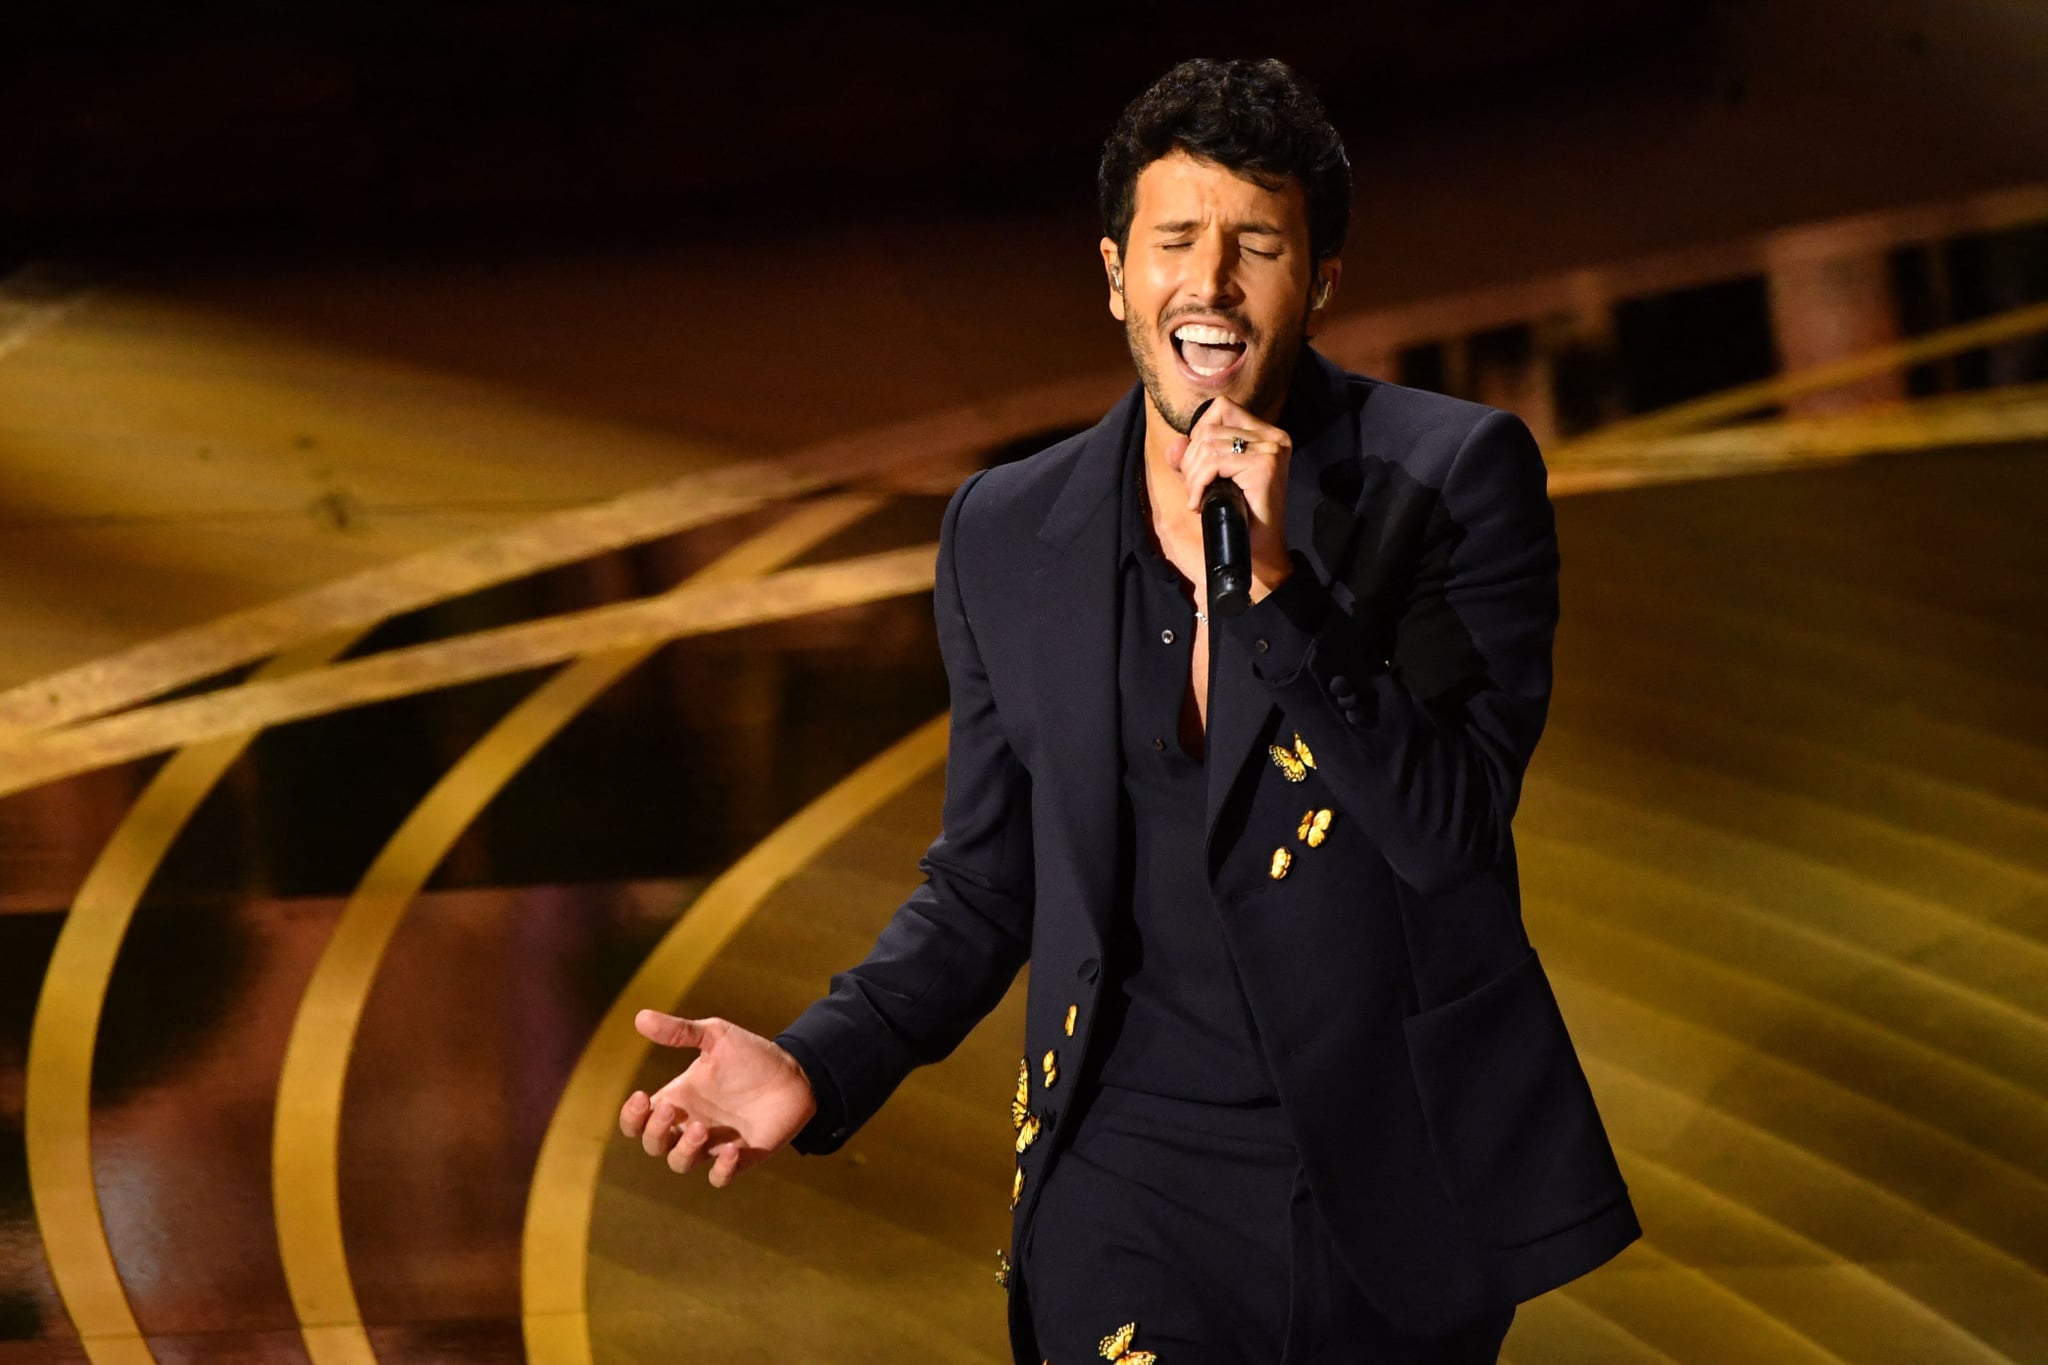 Colombian singer Sebastian Yatra performs onstage during the 94th Oscars at the Dolby Theatre in Hollywood, California on March 27, 2022. (Photo by Robyn Beck / AFP) (Photo by ROBYN BECK/AFP via Getty Images)